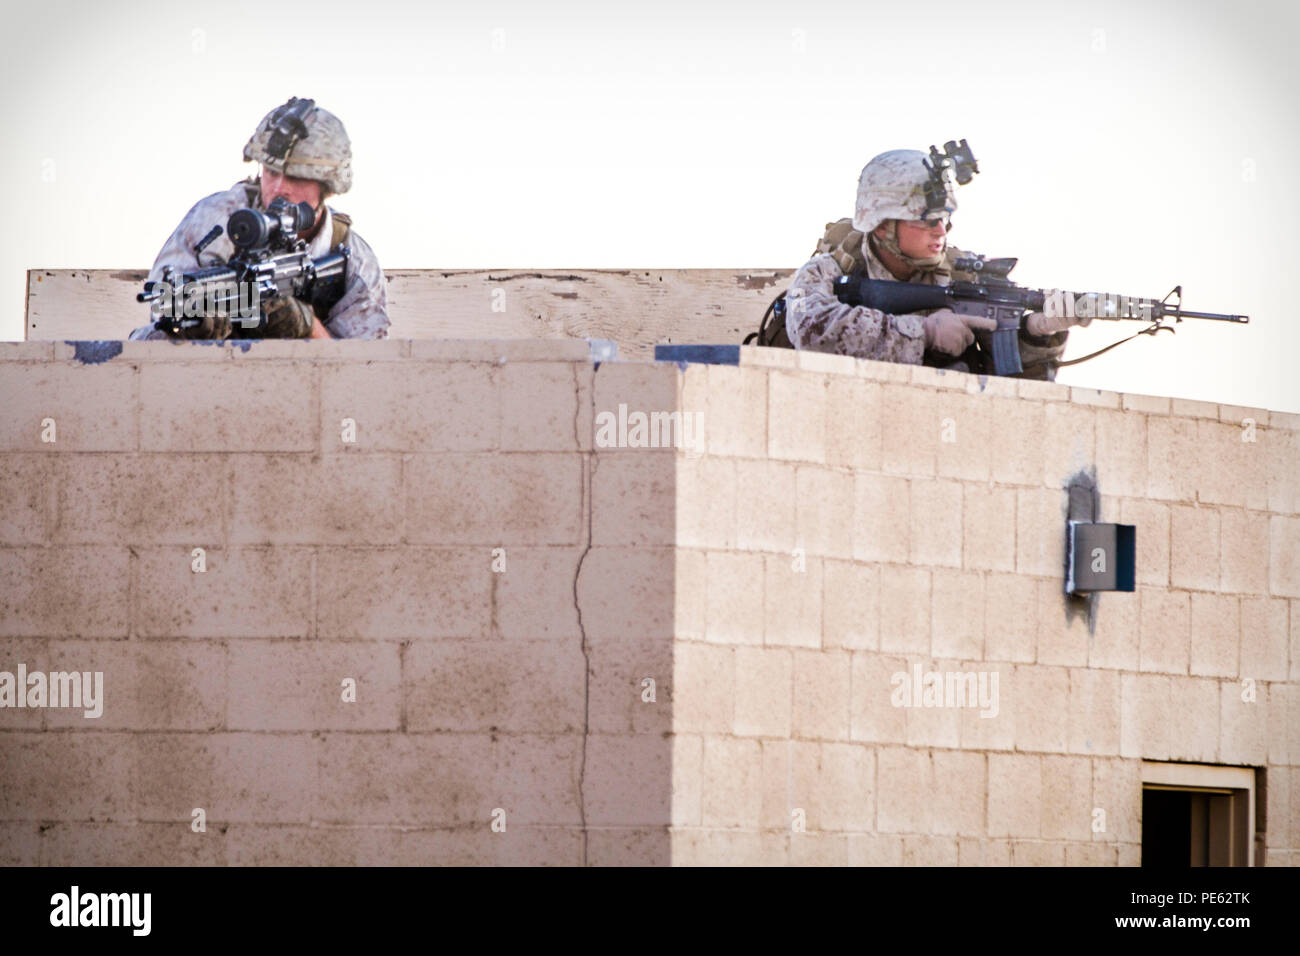 U.S. Marines with 2nd Battalion, 7th Marine Regiment, 1st Marine Division provide security during a heavy Huey raid at K-9 Village, Yuma Proving Grounds, Ariz., Oct. 7, 2015. The exercise is part of Weapons and Tactics Instructor (WTI) 1-16, a seven-week training event hosted by Marine Aviation Weapons and Tactics Squadron One (MAWTS-1) cadre. MAWTS-1 provides standardized tactical training and certification of unit instructor qualifications to support Marine Aviation Training and Readiness and assists in developing and employing aviation weapons and tactics. (U.S. Marine Corps photograph by C Stock Photo